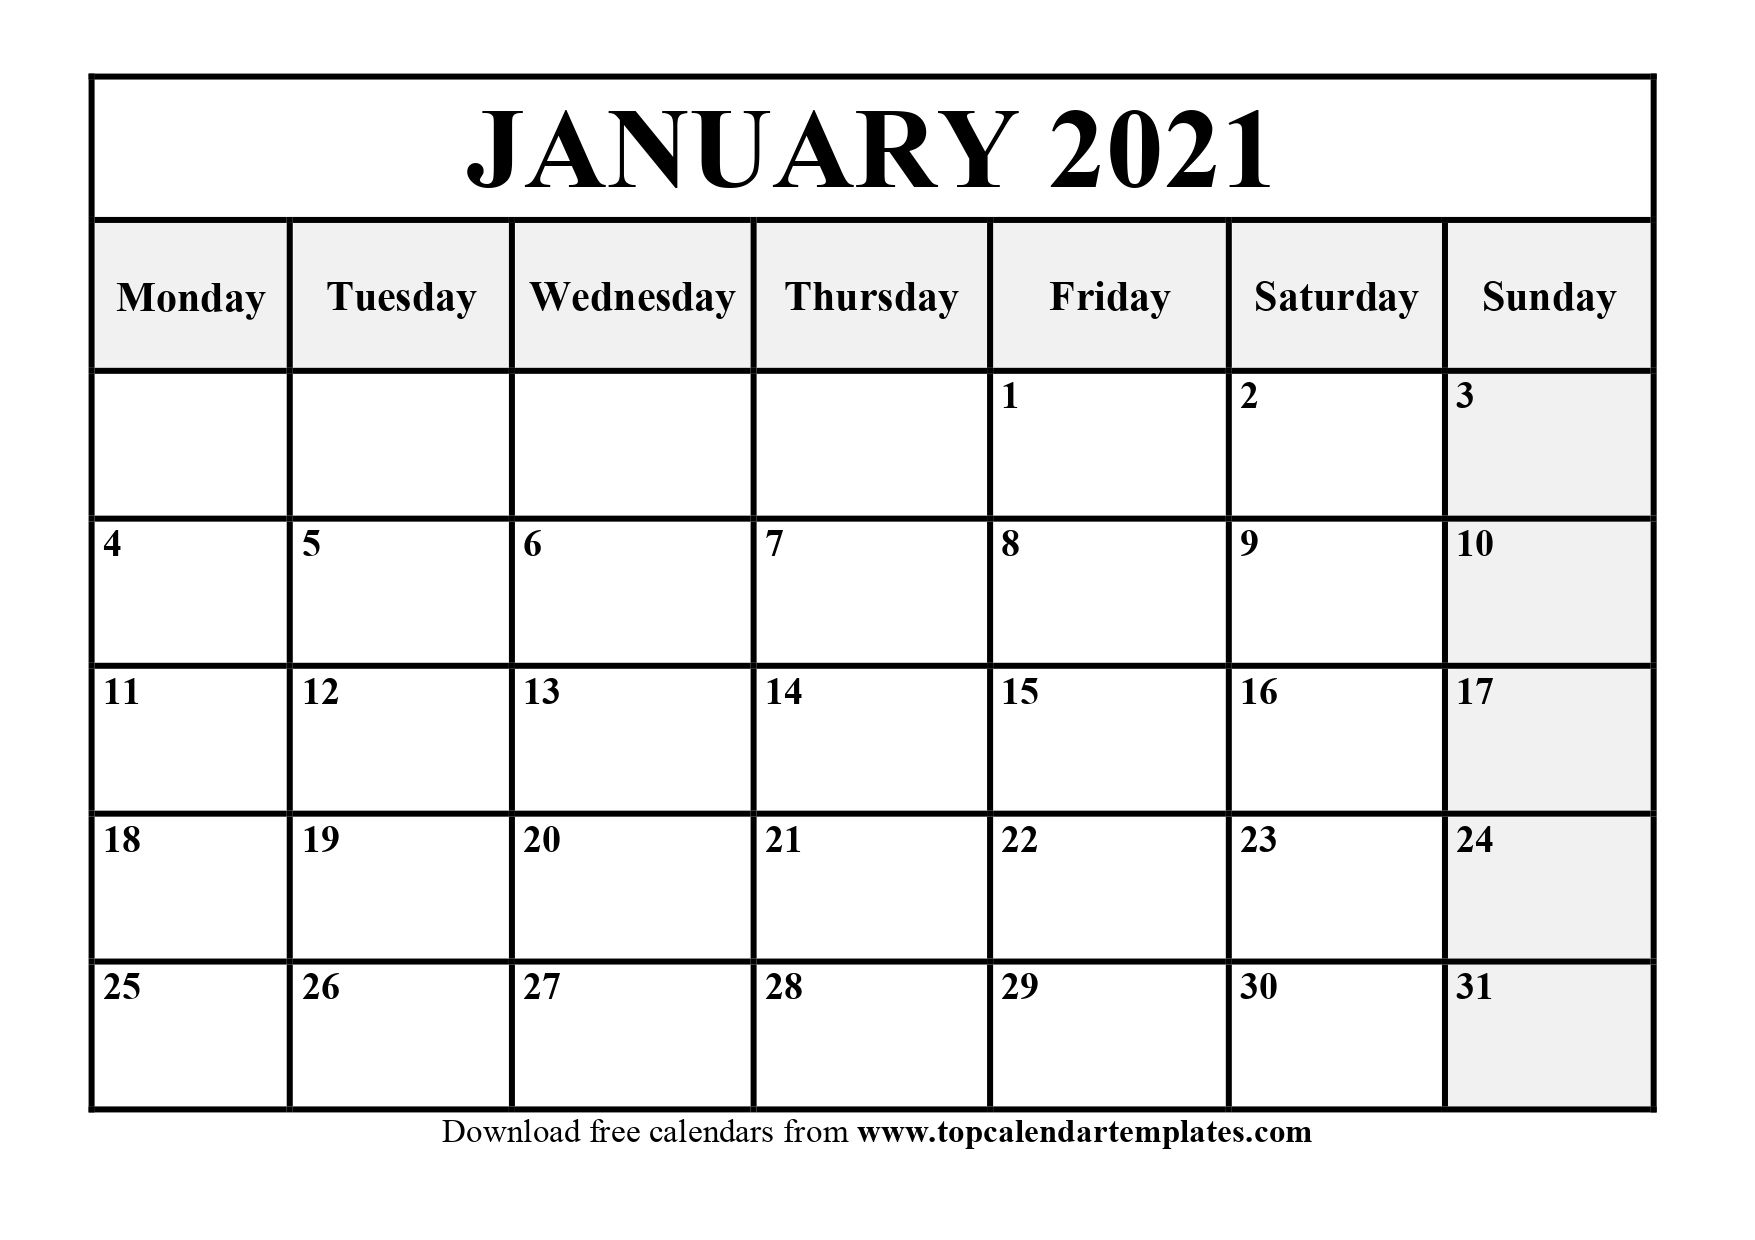 free 2021 yearly calender template : calendar 2021